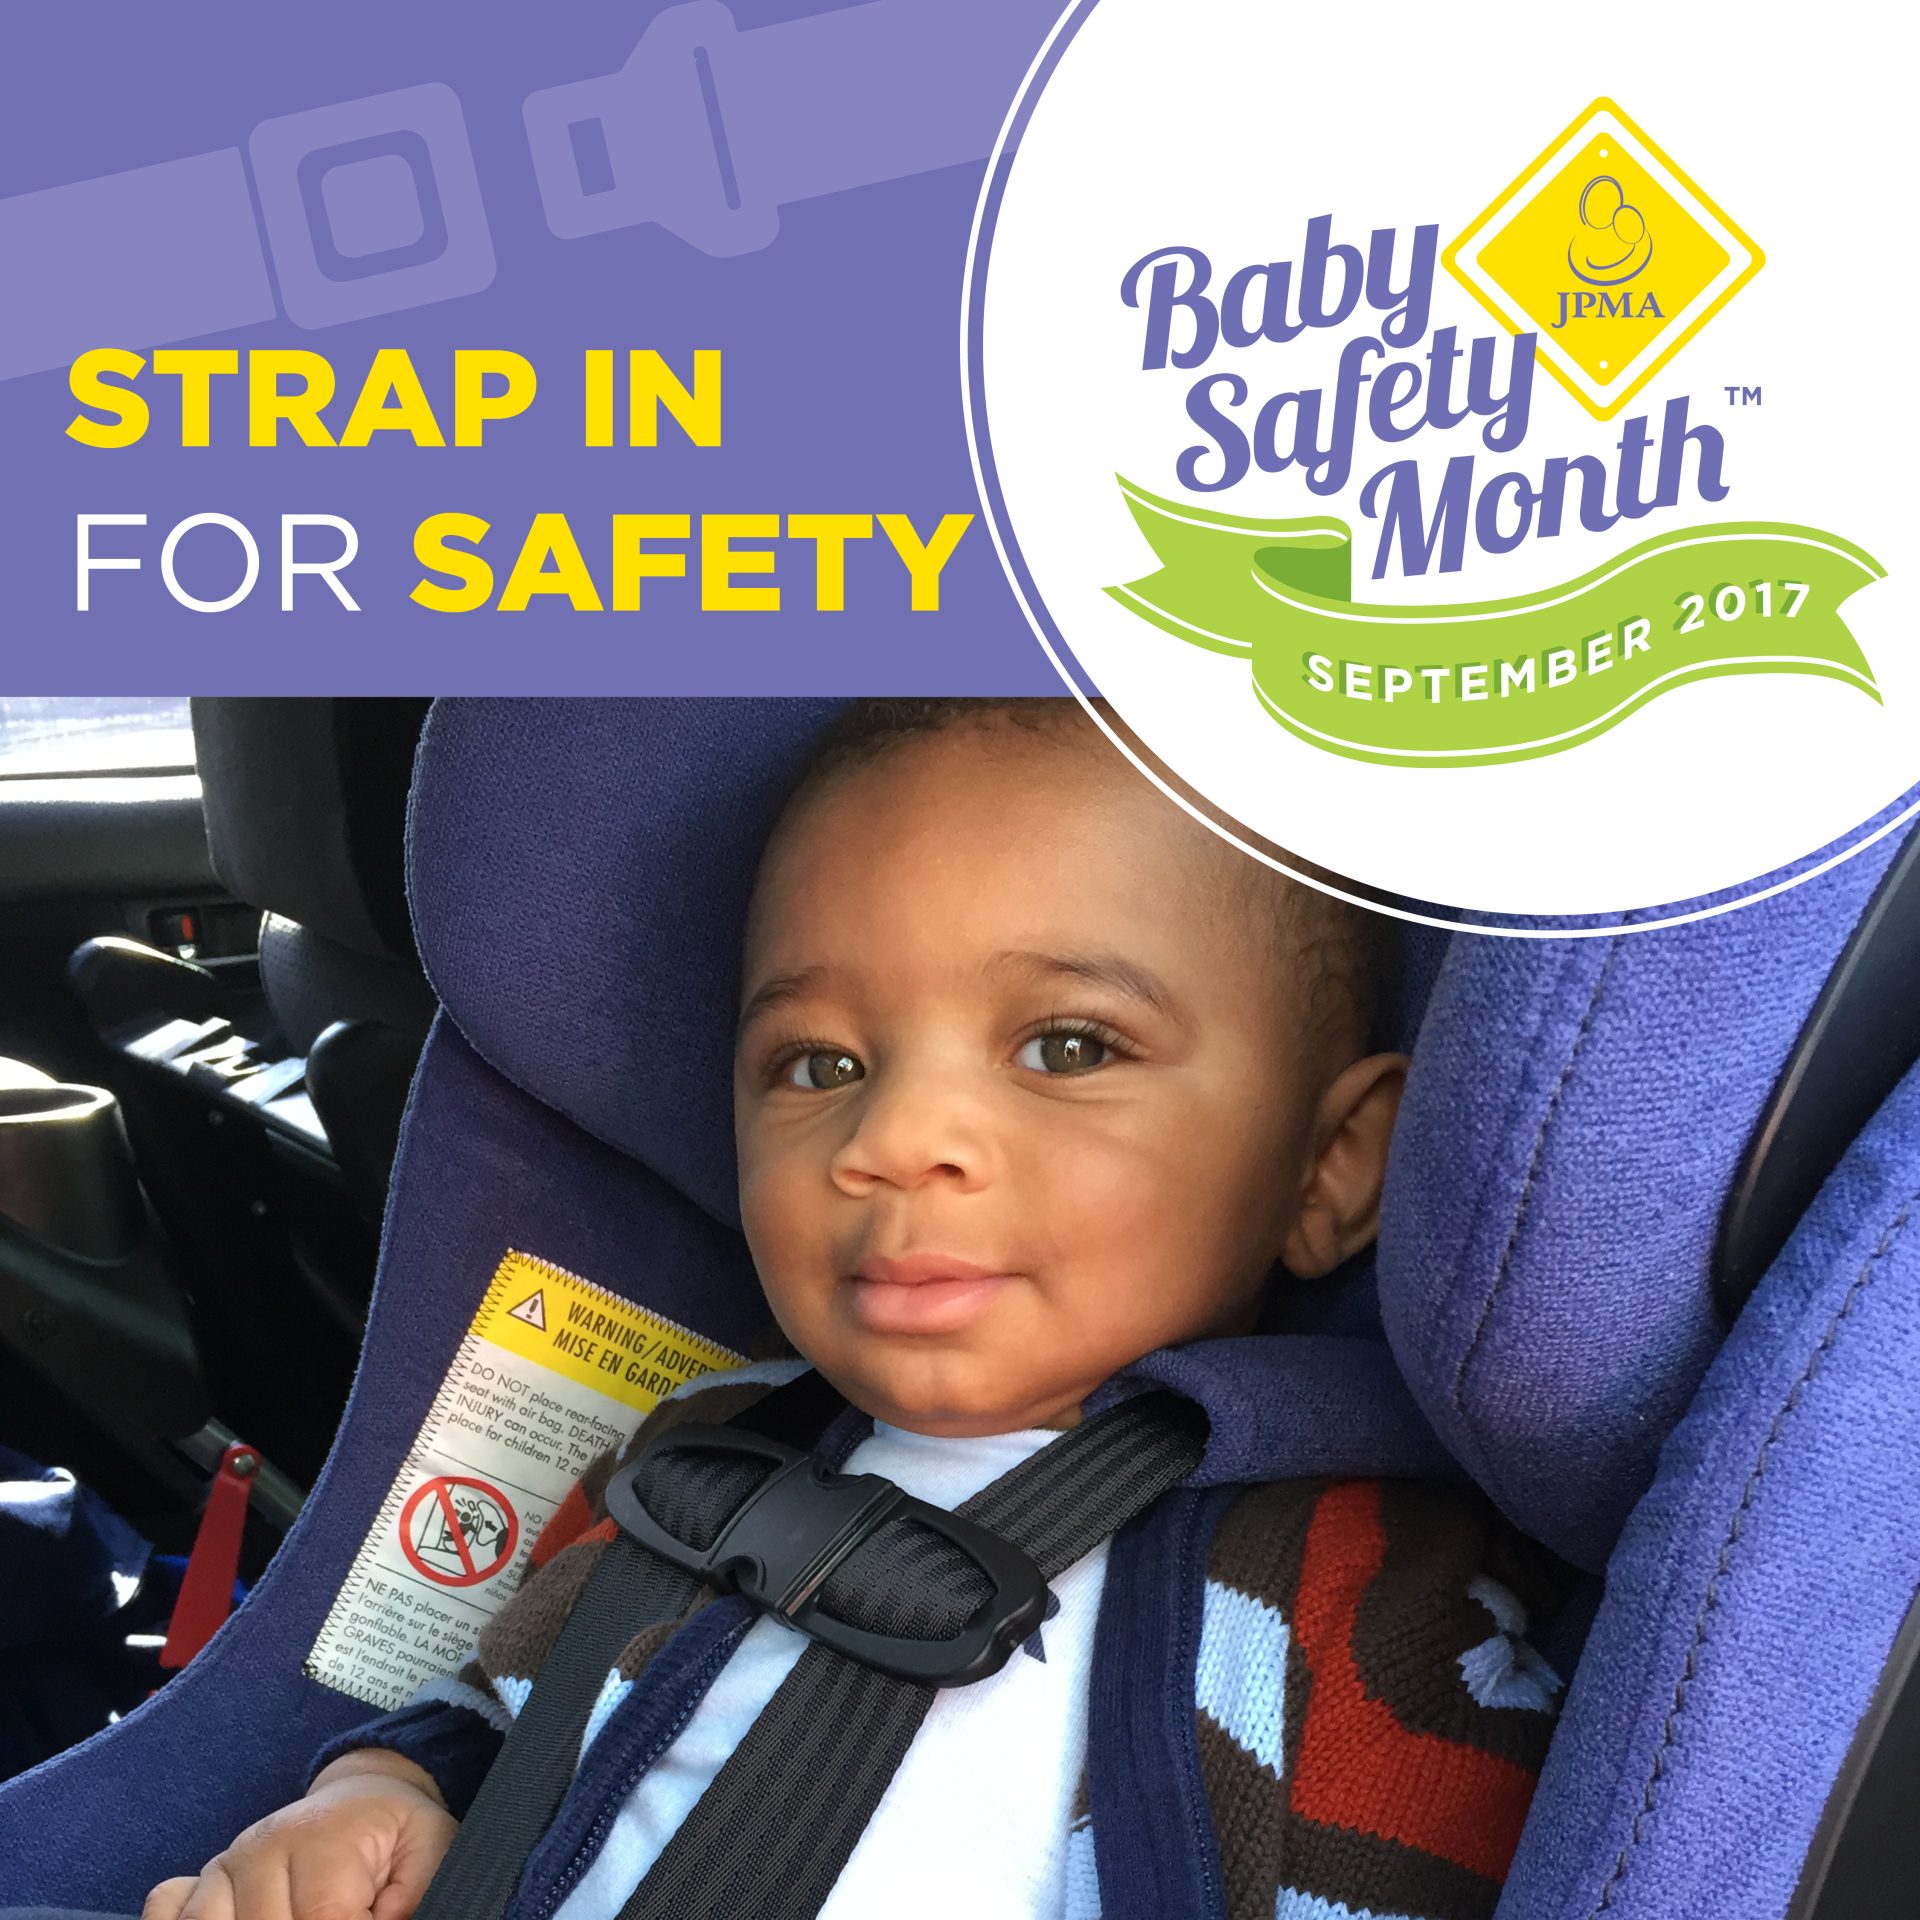 Baby Safety Month: Strap in for Safety While On the Go with JPMA